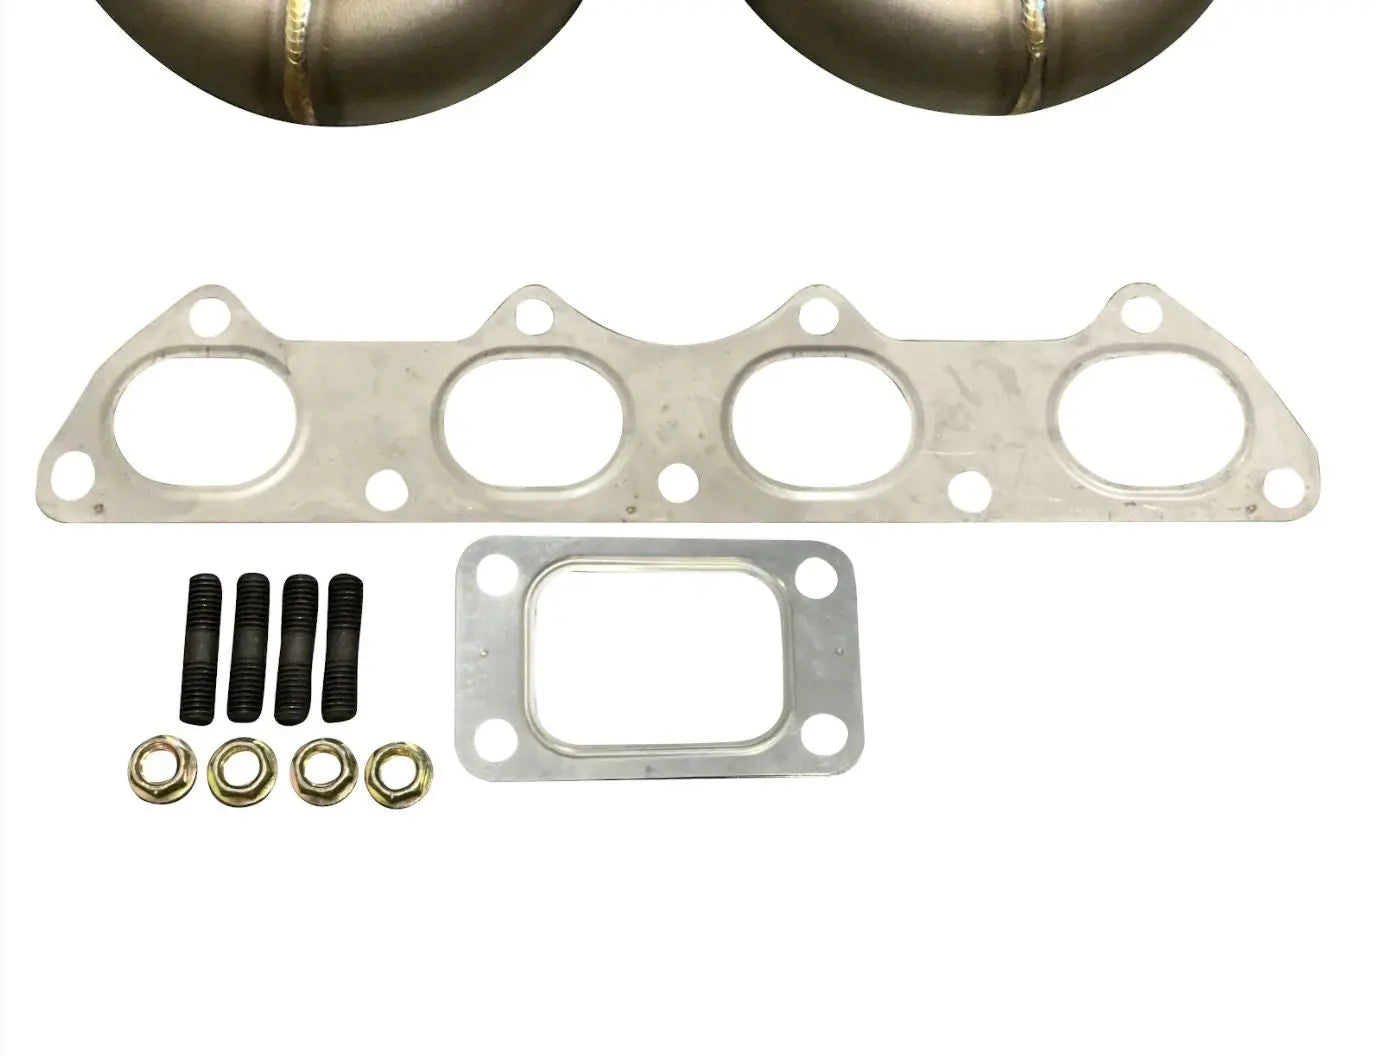 B Series Ram Horn AC T3 Turbo Manifold GSR Si B16 B18 B20 For Civic EG EK  DC2 US  High Quality Automotive Performance Parts and Accessories.  Competitive Pricing, Great Customer Service.